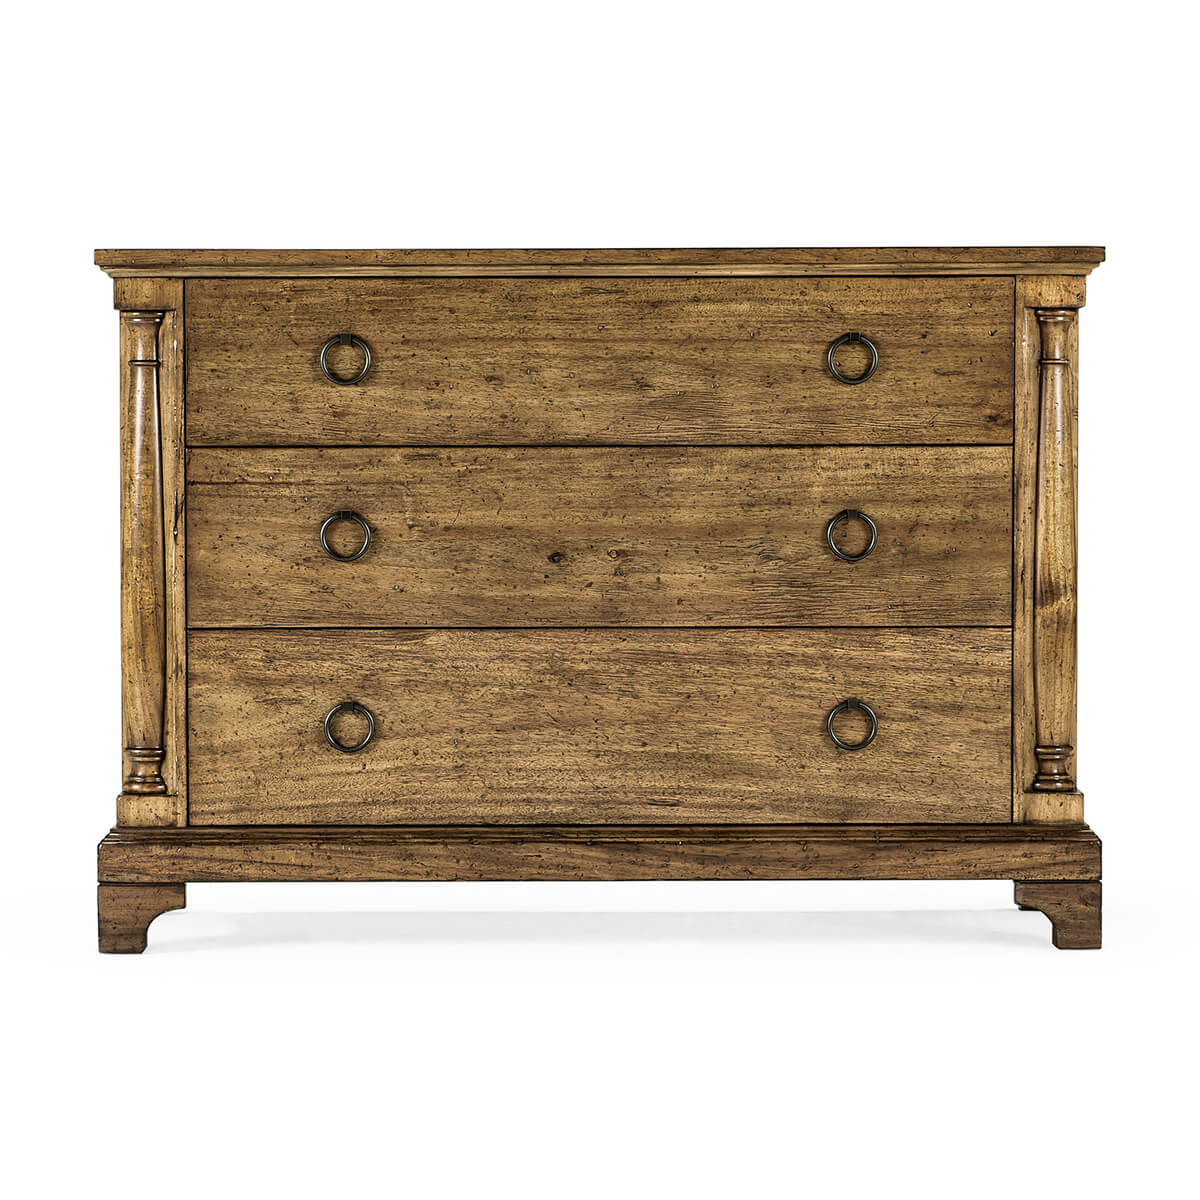 French Country Chest of Drawers - Drift - English Georgian America